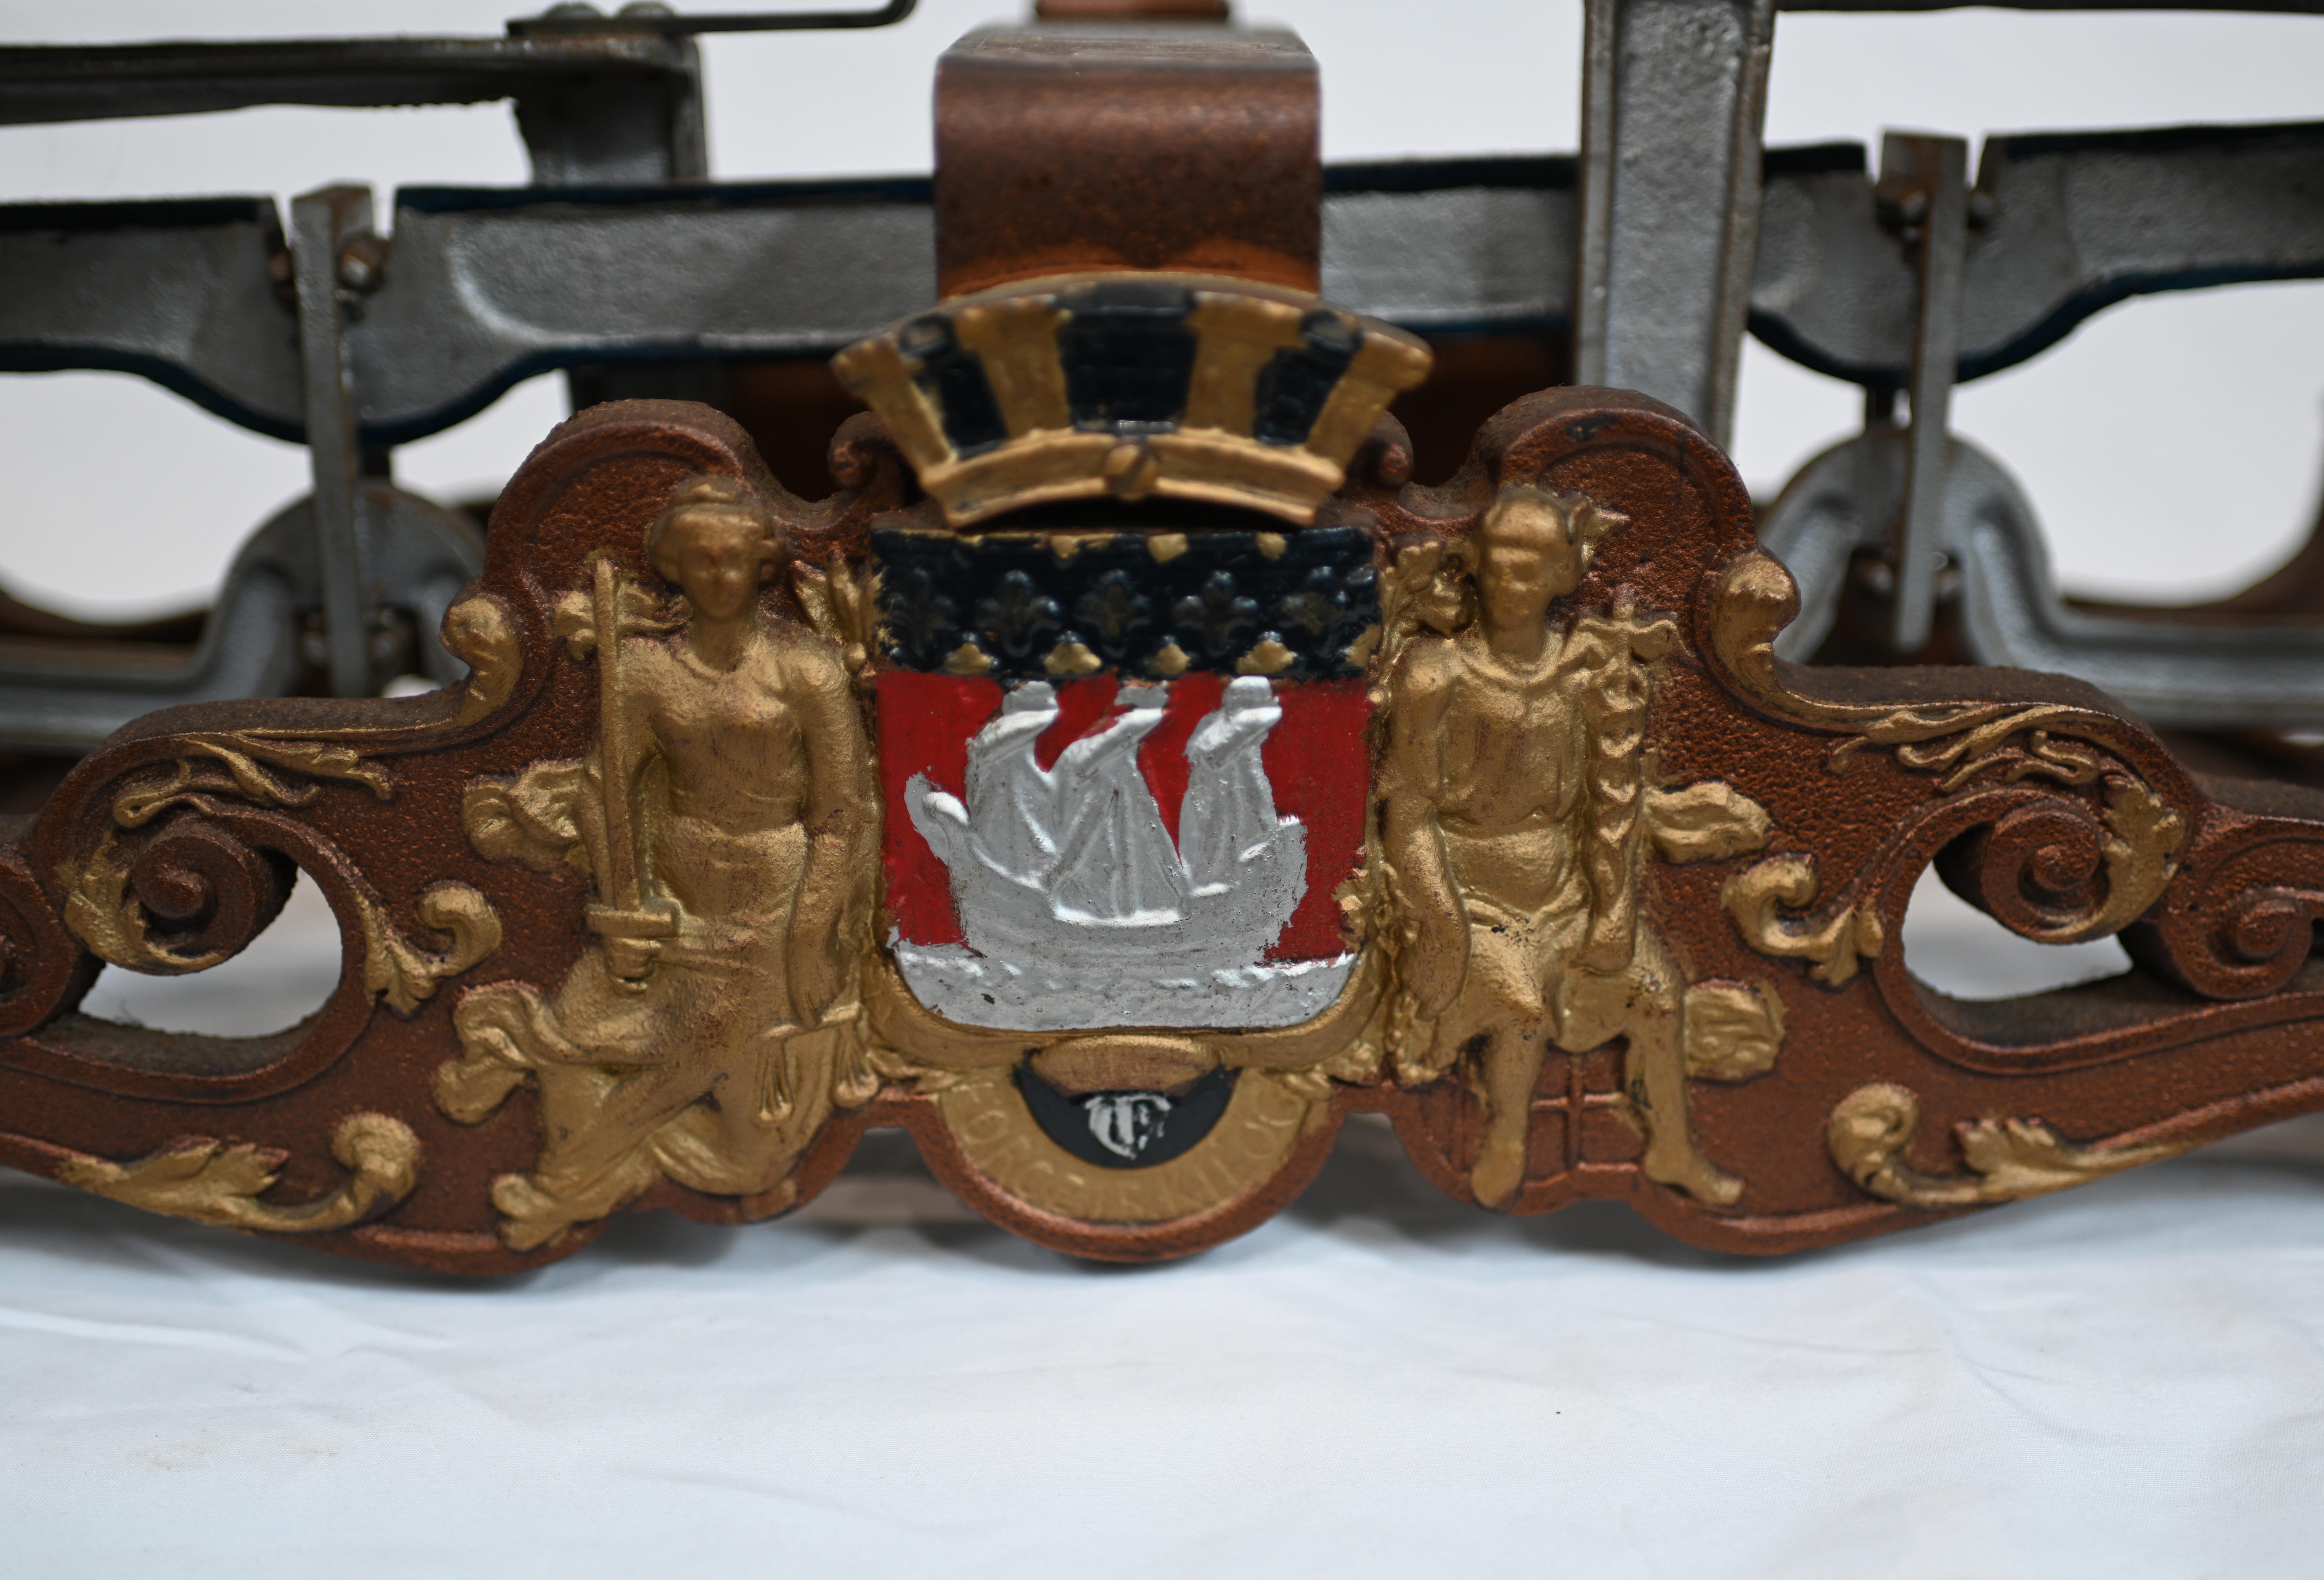 Collectable set of Victorian scales in cast iron
circa 1860
Features a colourful crest attached
We can ship to anywhere in the world 
Offered in great shape ready for home use right away.